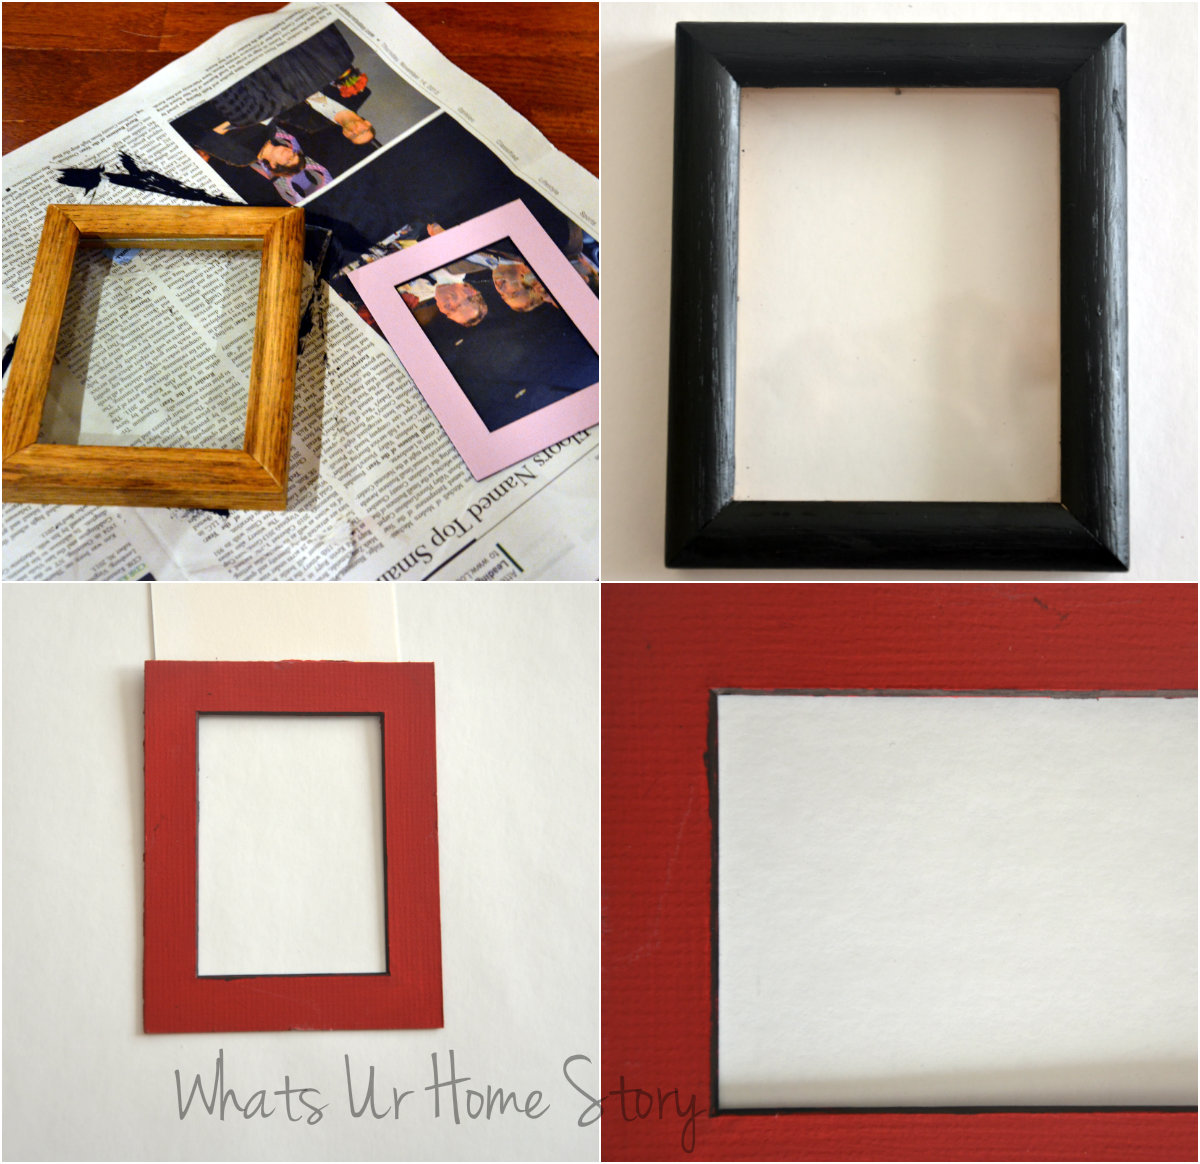 How to Reframe Art Using Thrift Store & Markdown Frames – Joy's Life